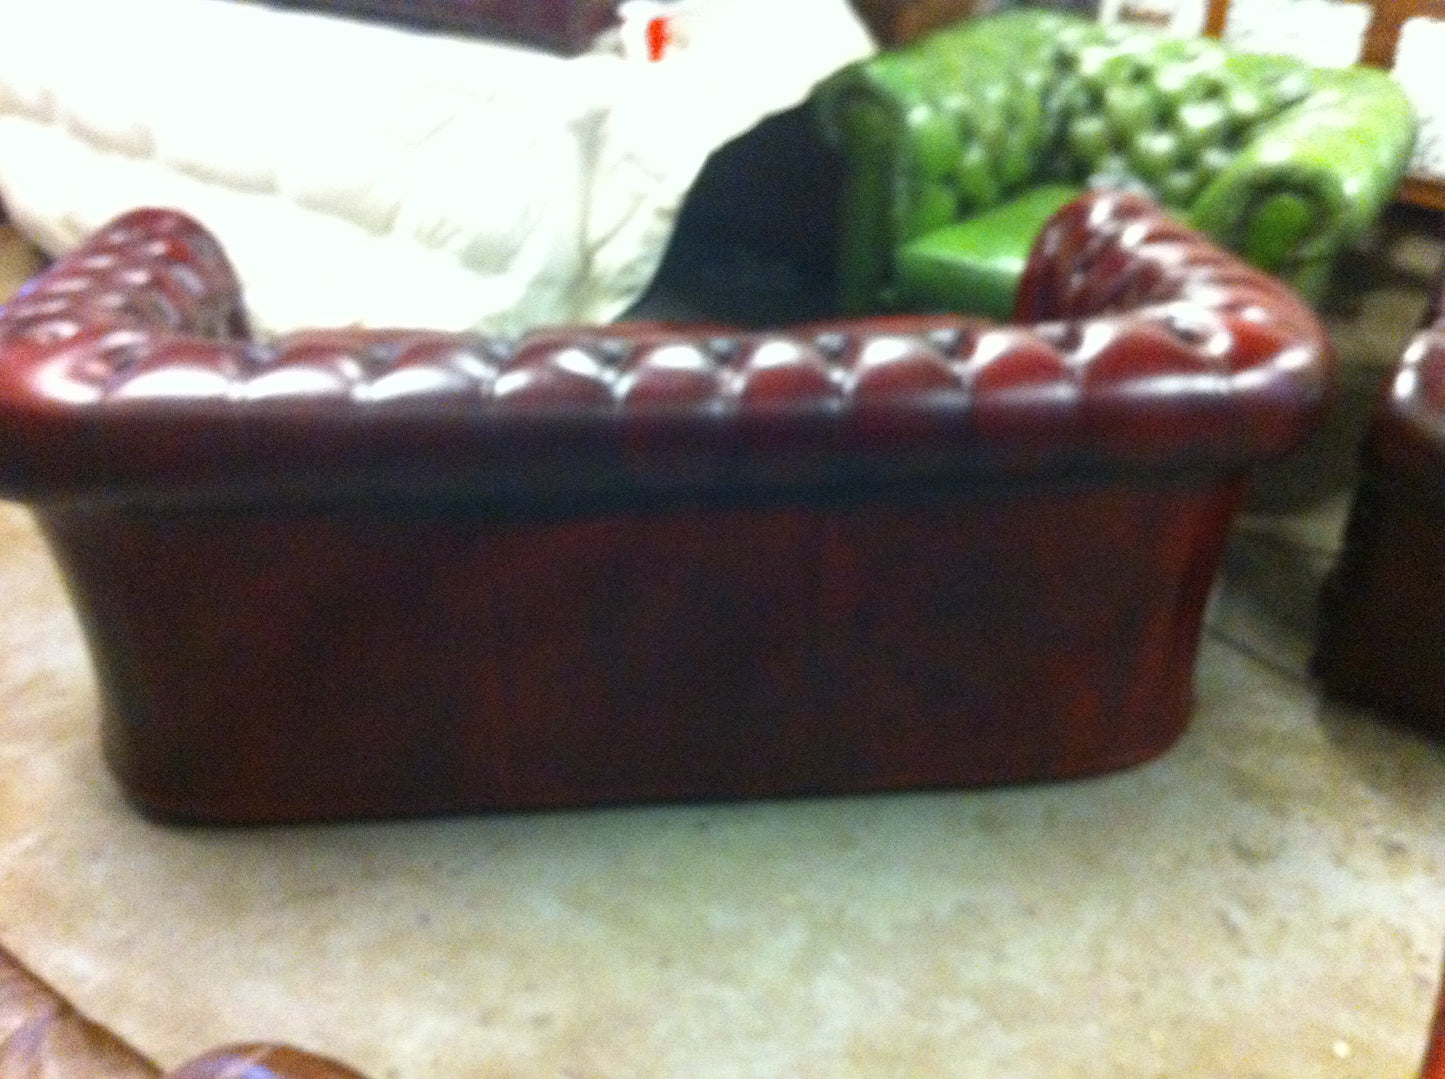 Lovely Late 20th century Vintage Hand Dyed Oxblood Leather Chesterfield Sofa